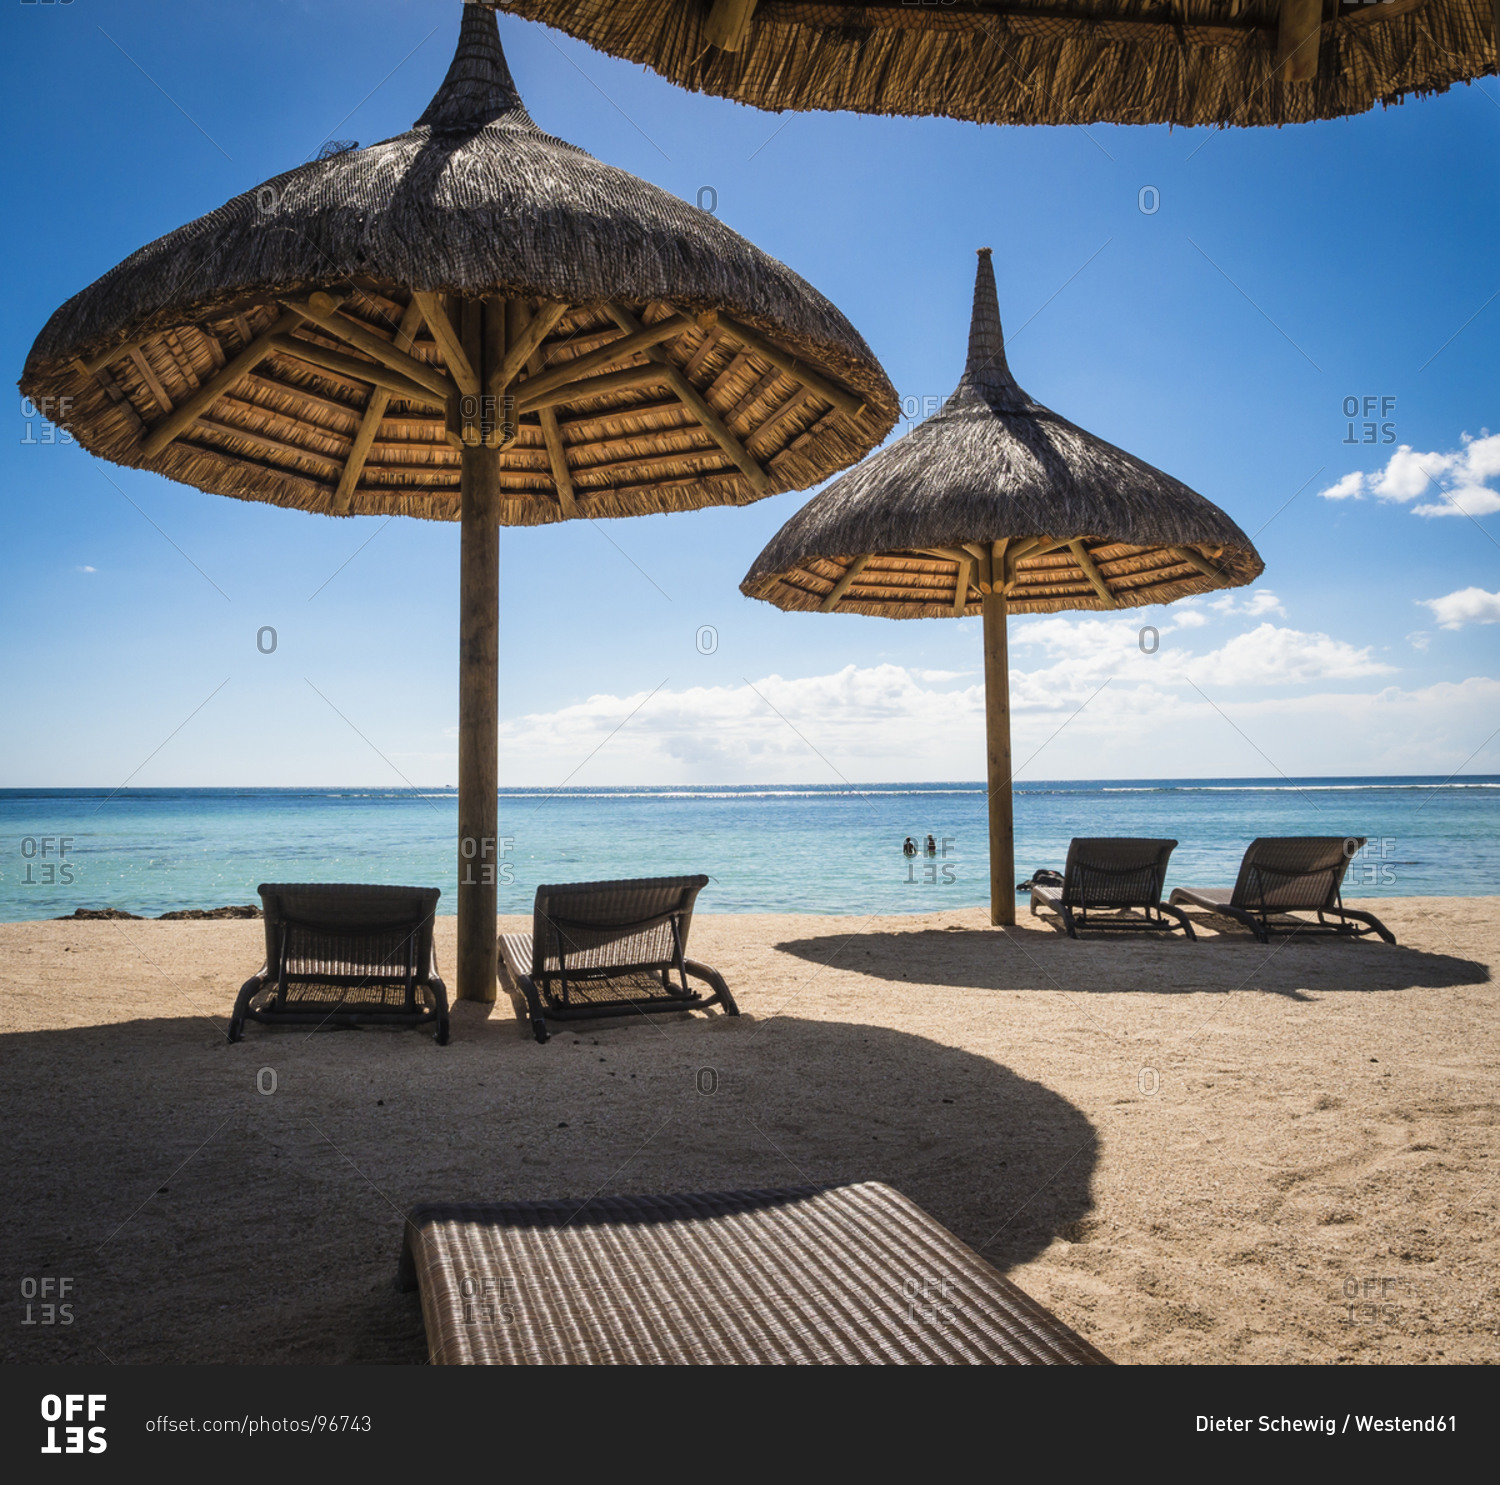 Mauritius, sunshades and beach chairs in front of the sea